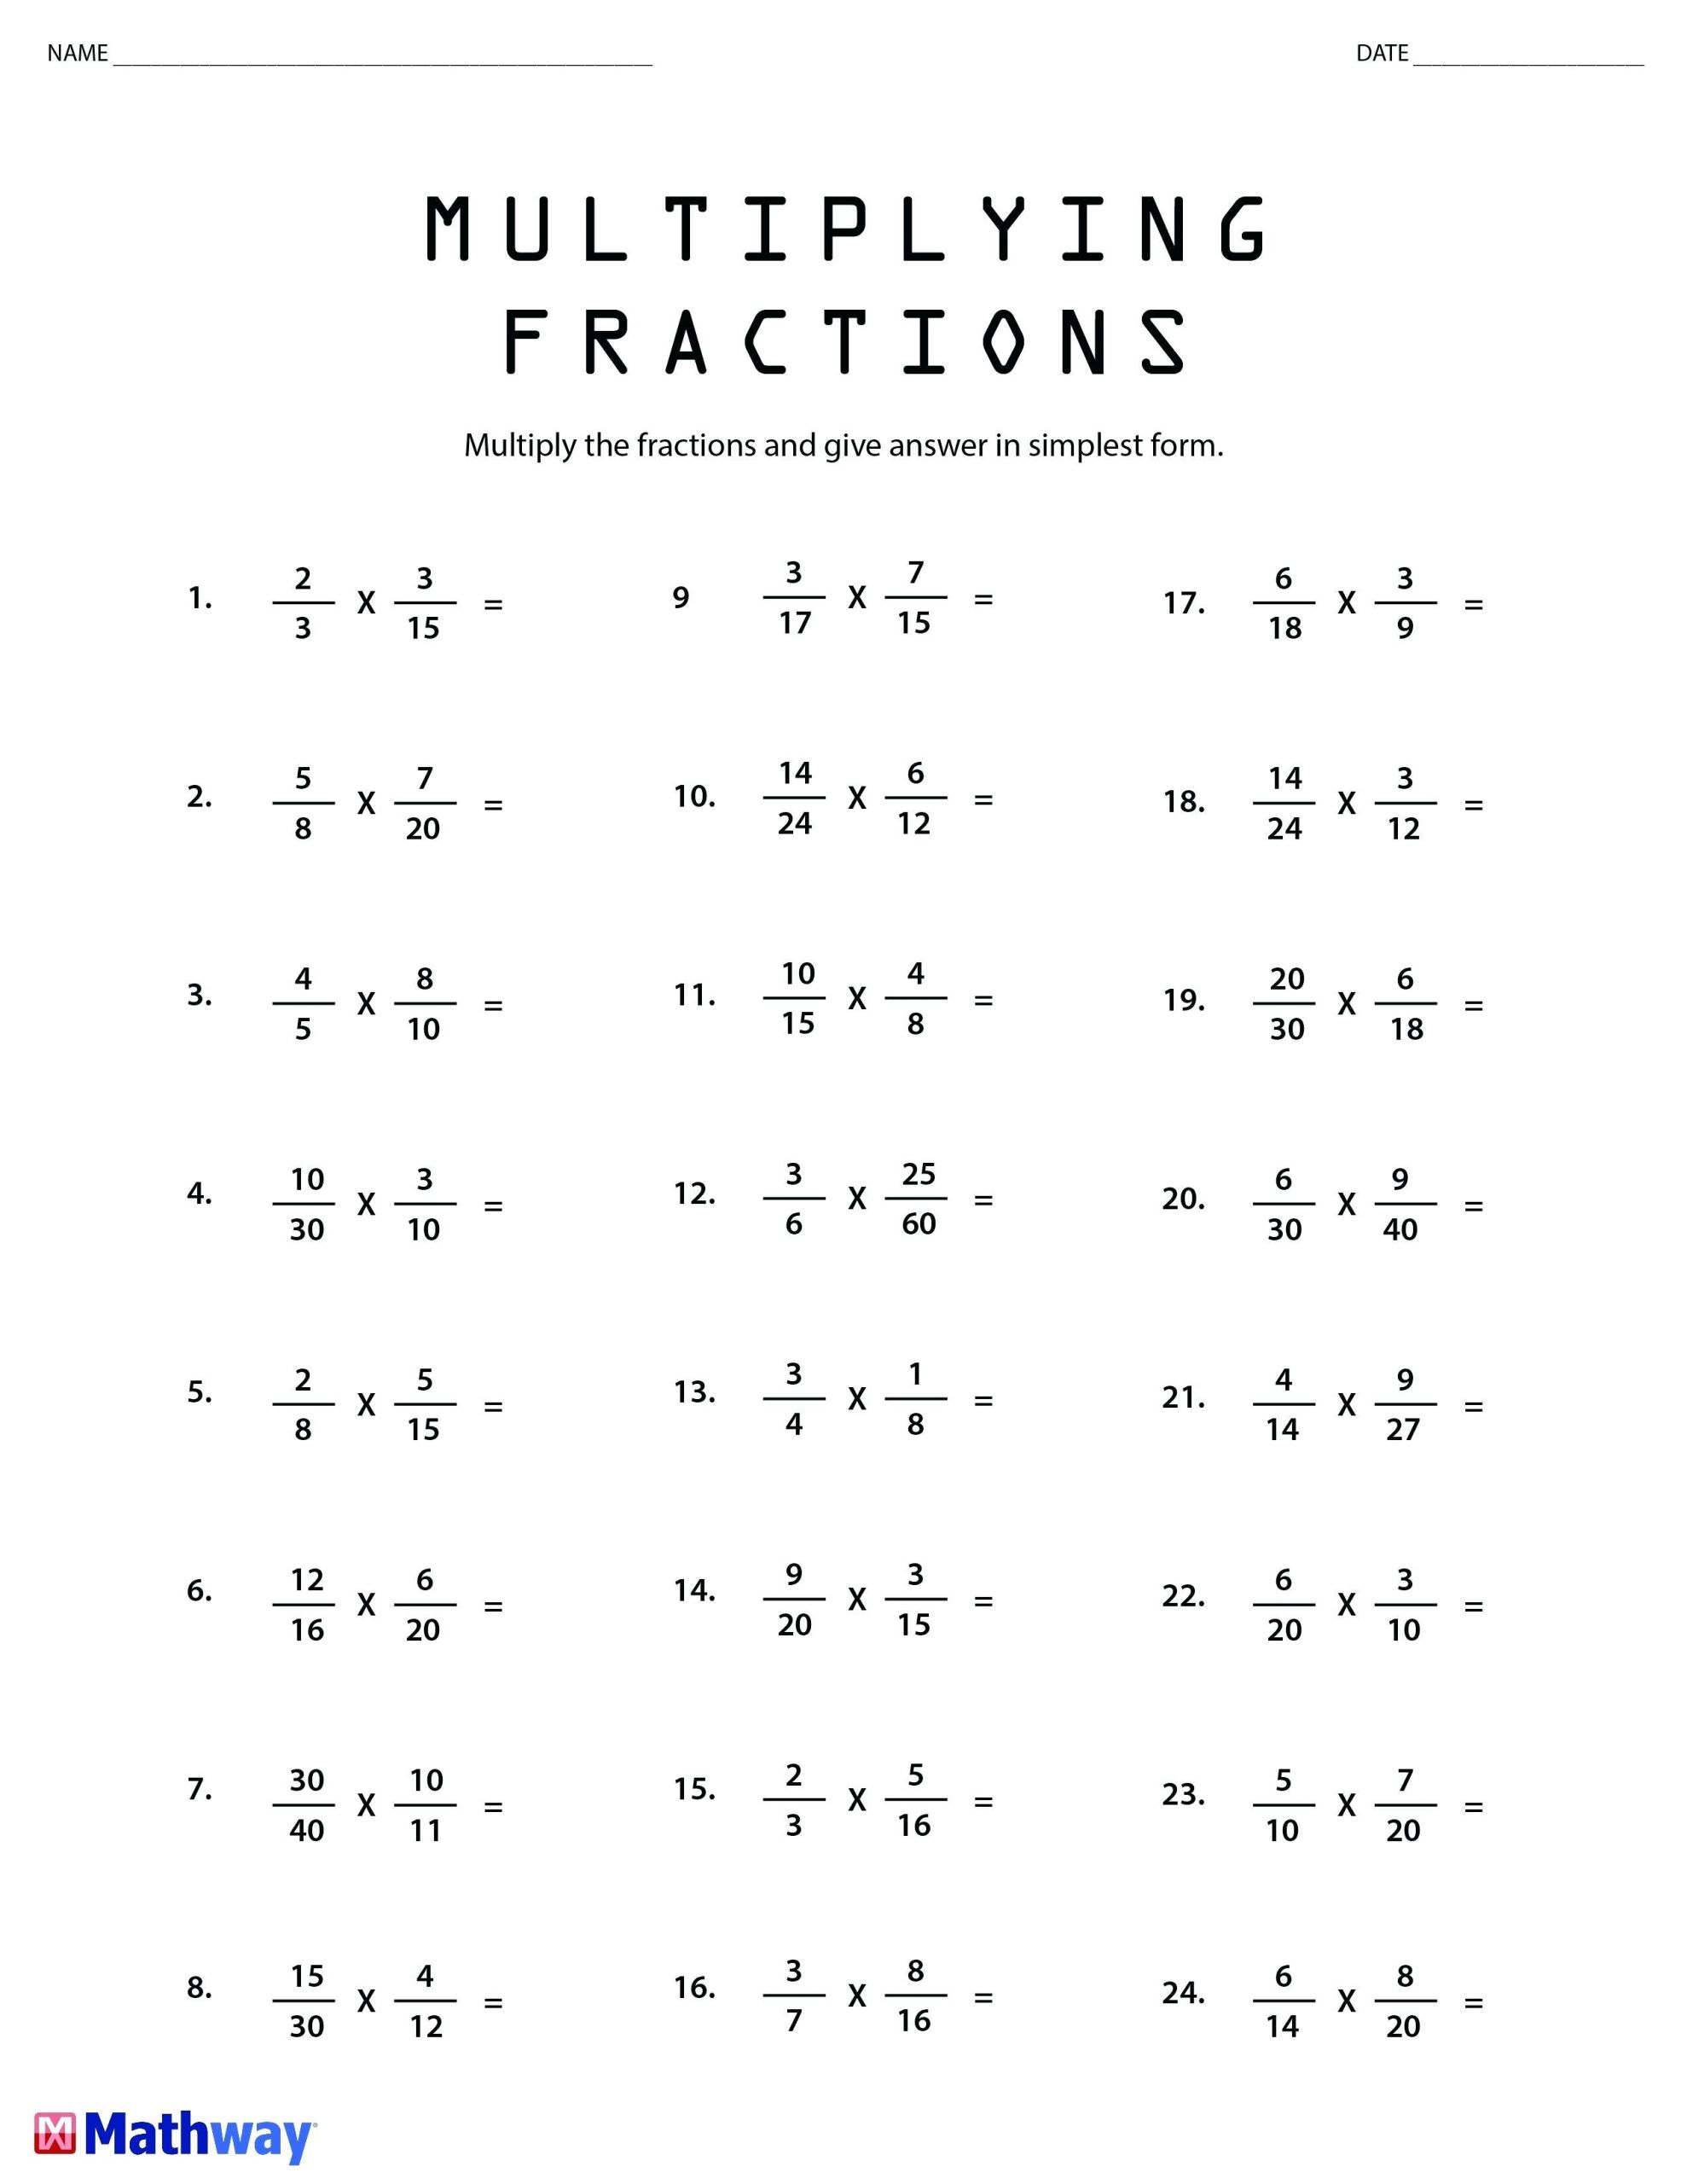 Free Math Worksheets Third Grade 3 Fractions and Decimals Subtracting Fractions From Mixed Numbers